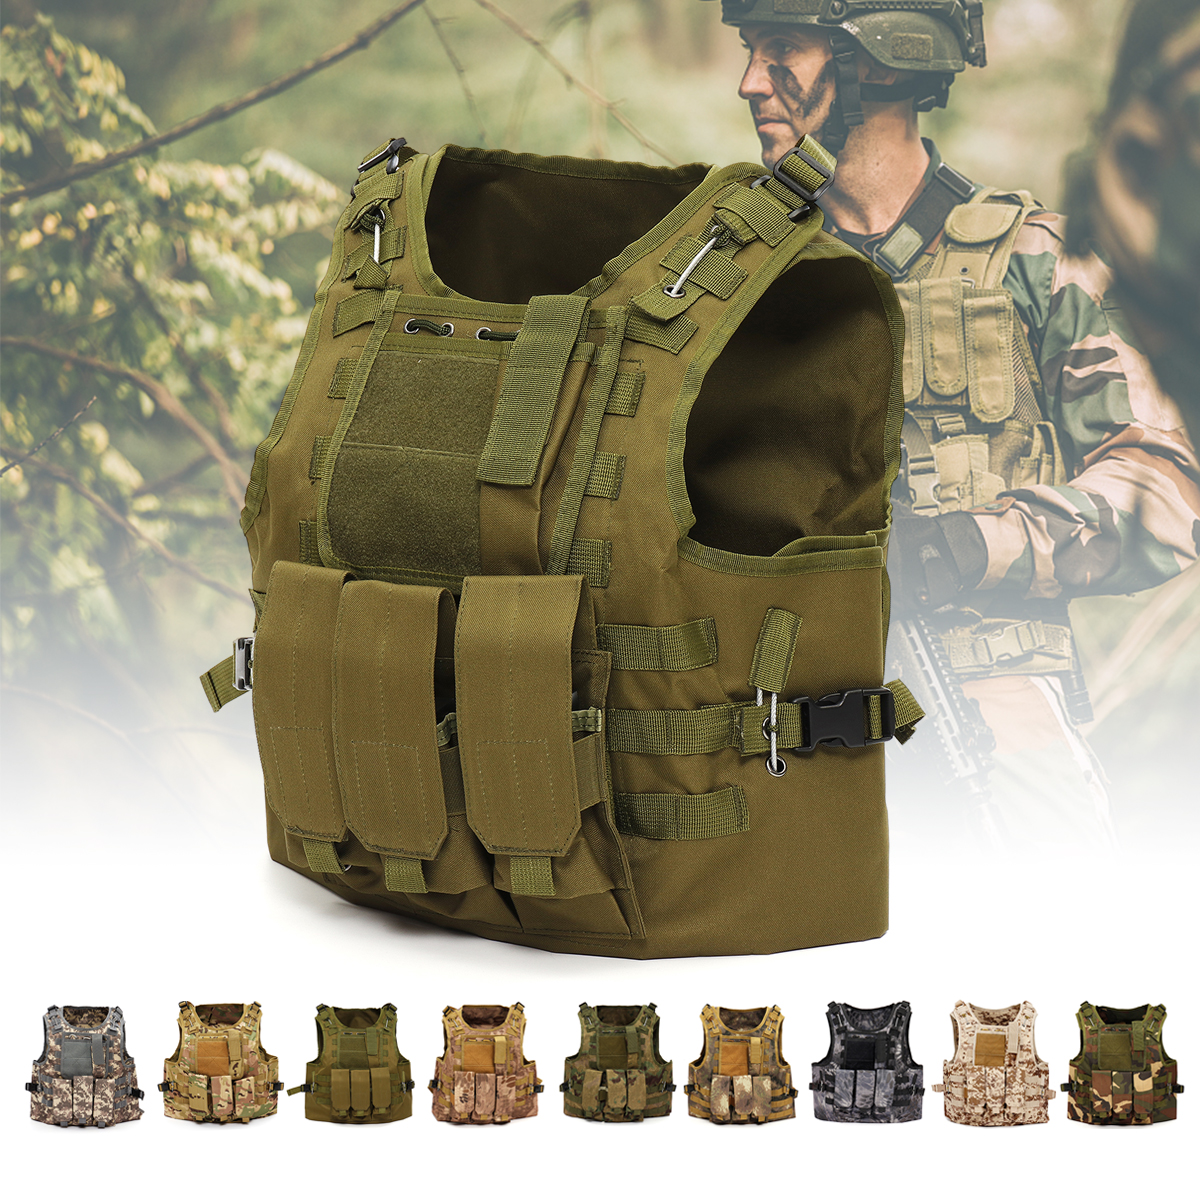 Outdoor-Tactical-Military-Vest-Sports-Hunting-Hiking-Climbing-Plate-Carrier-Paintball-Combat-Vest-1431934-1